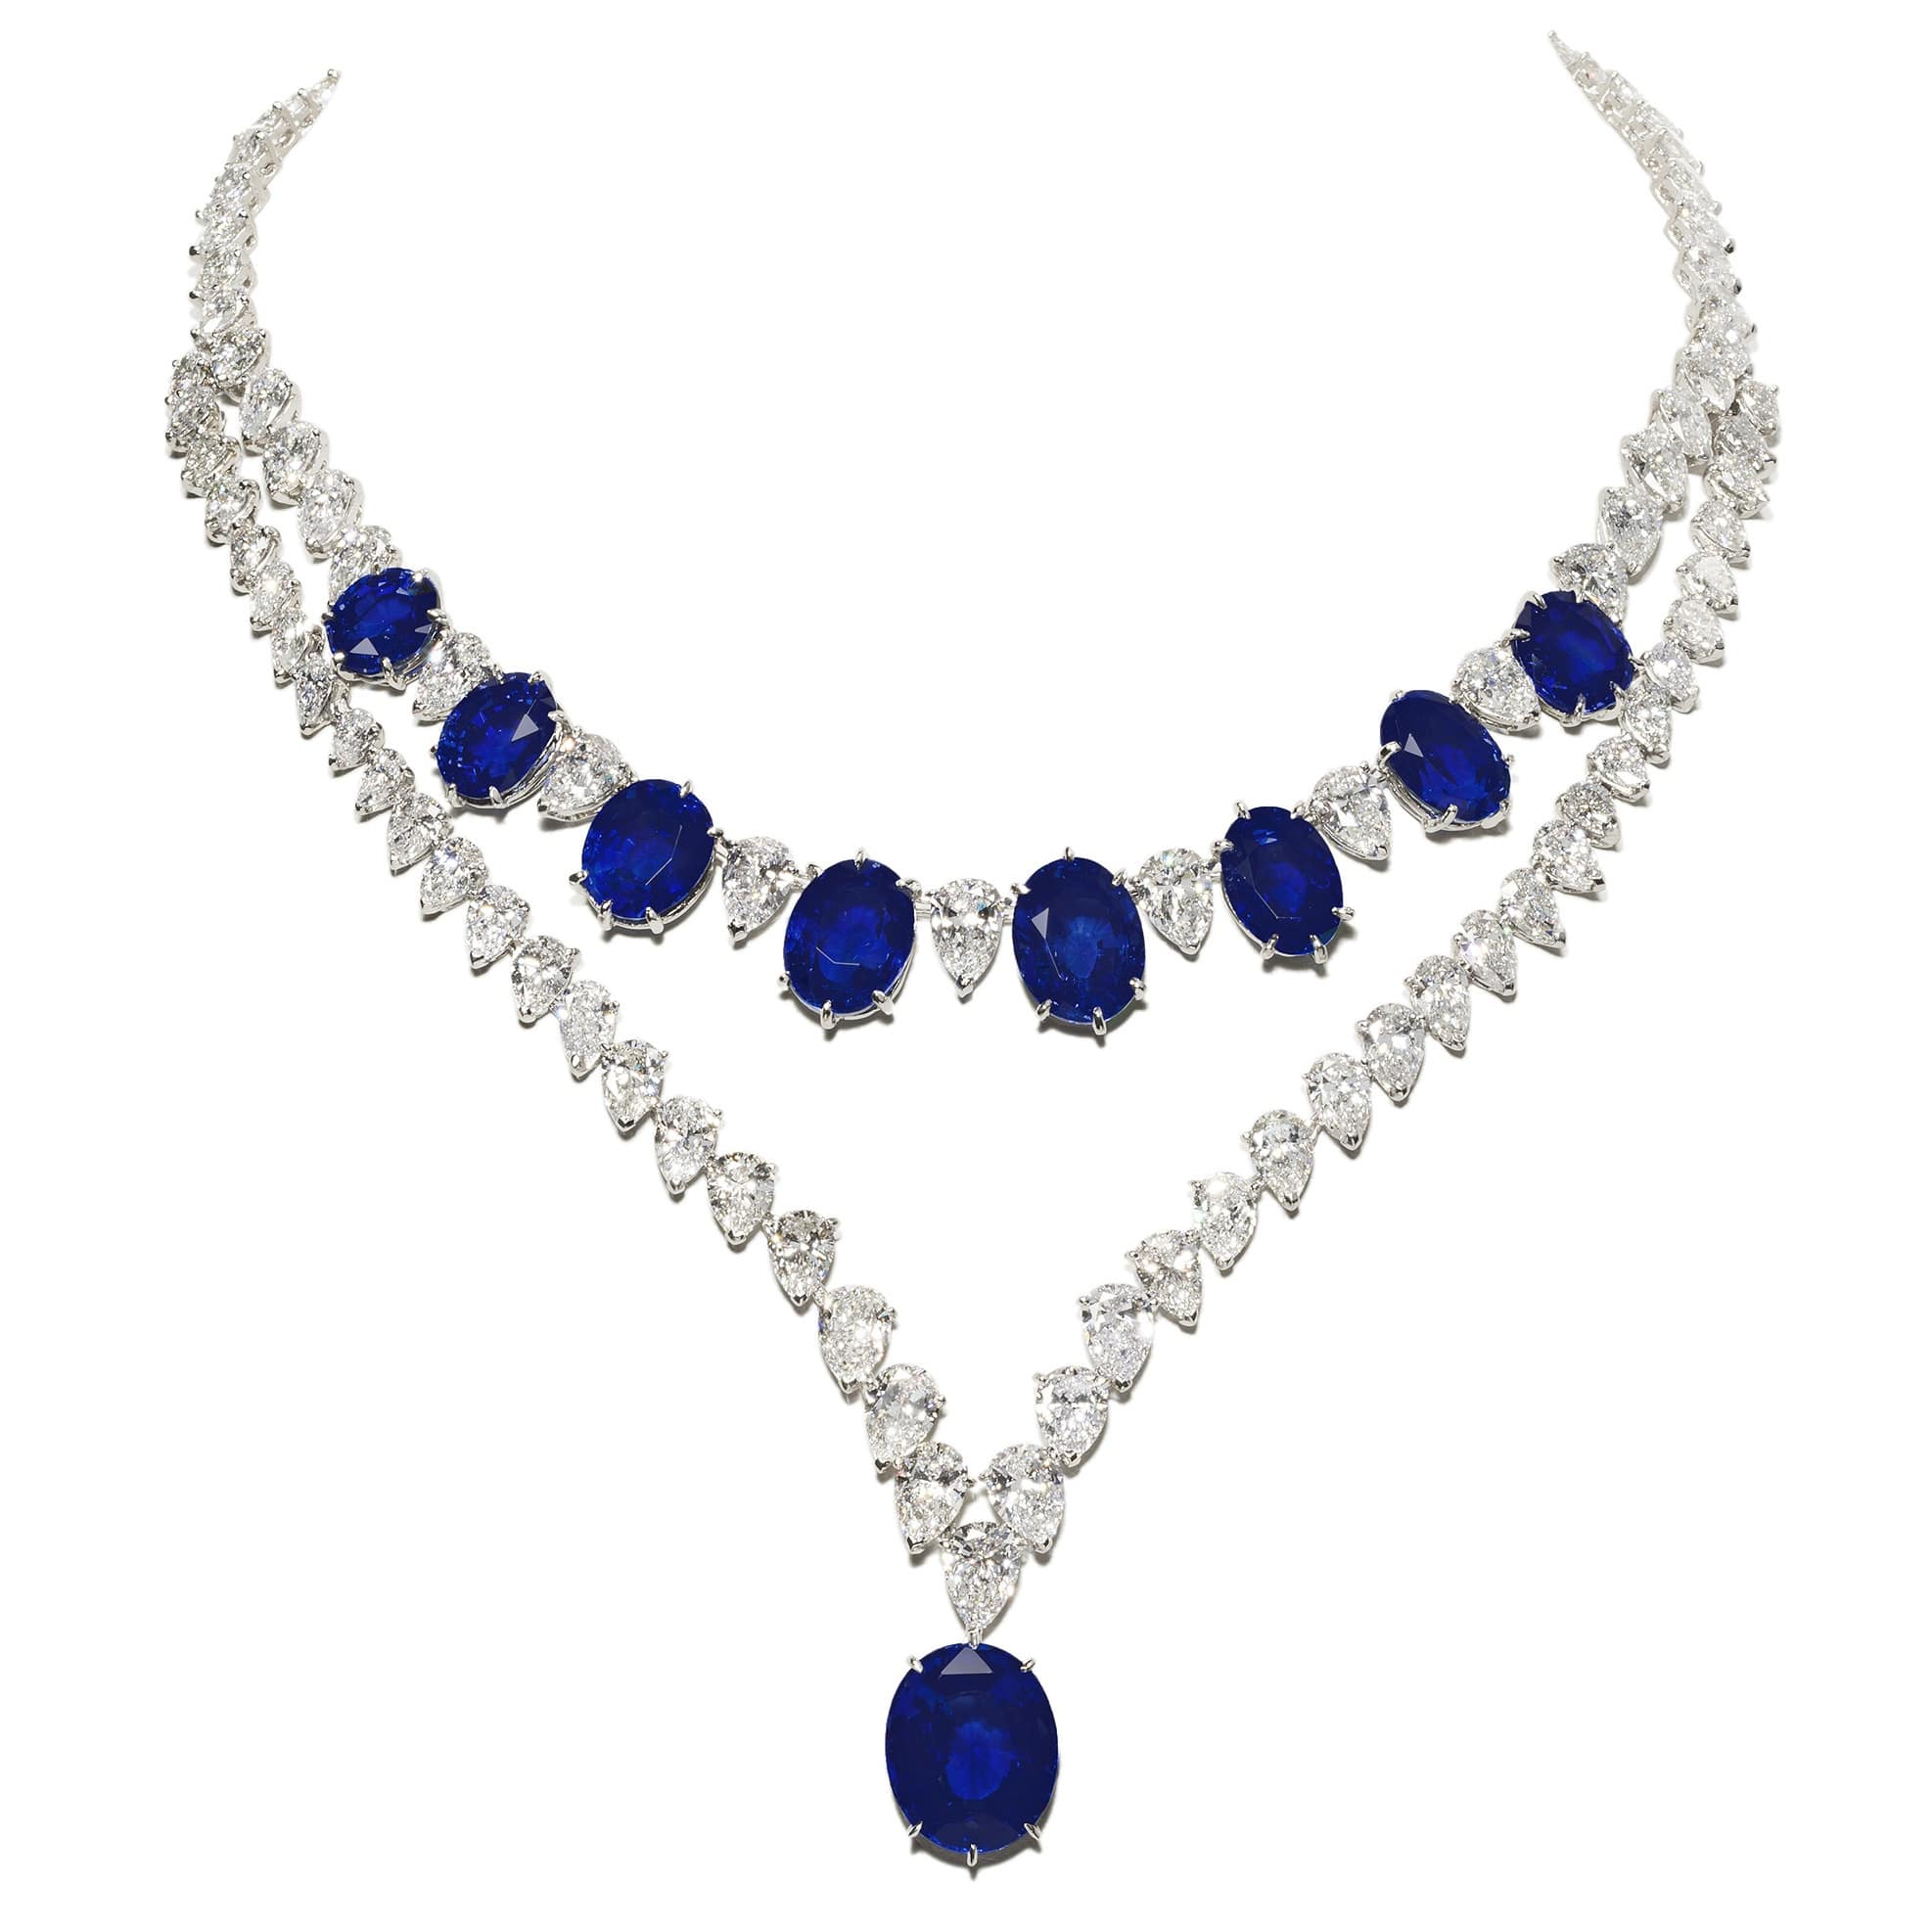 JewelryPalace Huge Pear Cut 10.9ct Created Blue Sapphire Halo Pendant  Necklace for Women, 14k White Gold Plated 925 Sterling Silver Necklaces for  Her, Gemstone Necklace 18 Inches Chain Jewellery Sets : Amazon.co.uk: